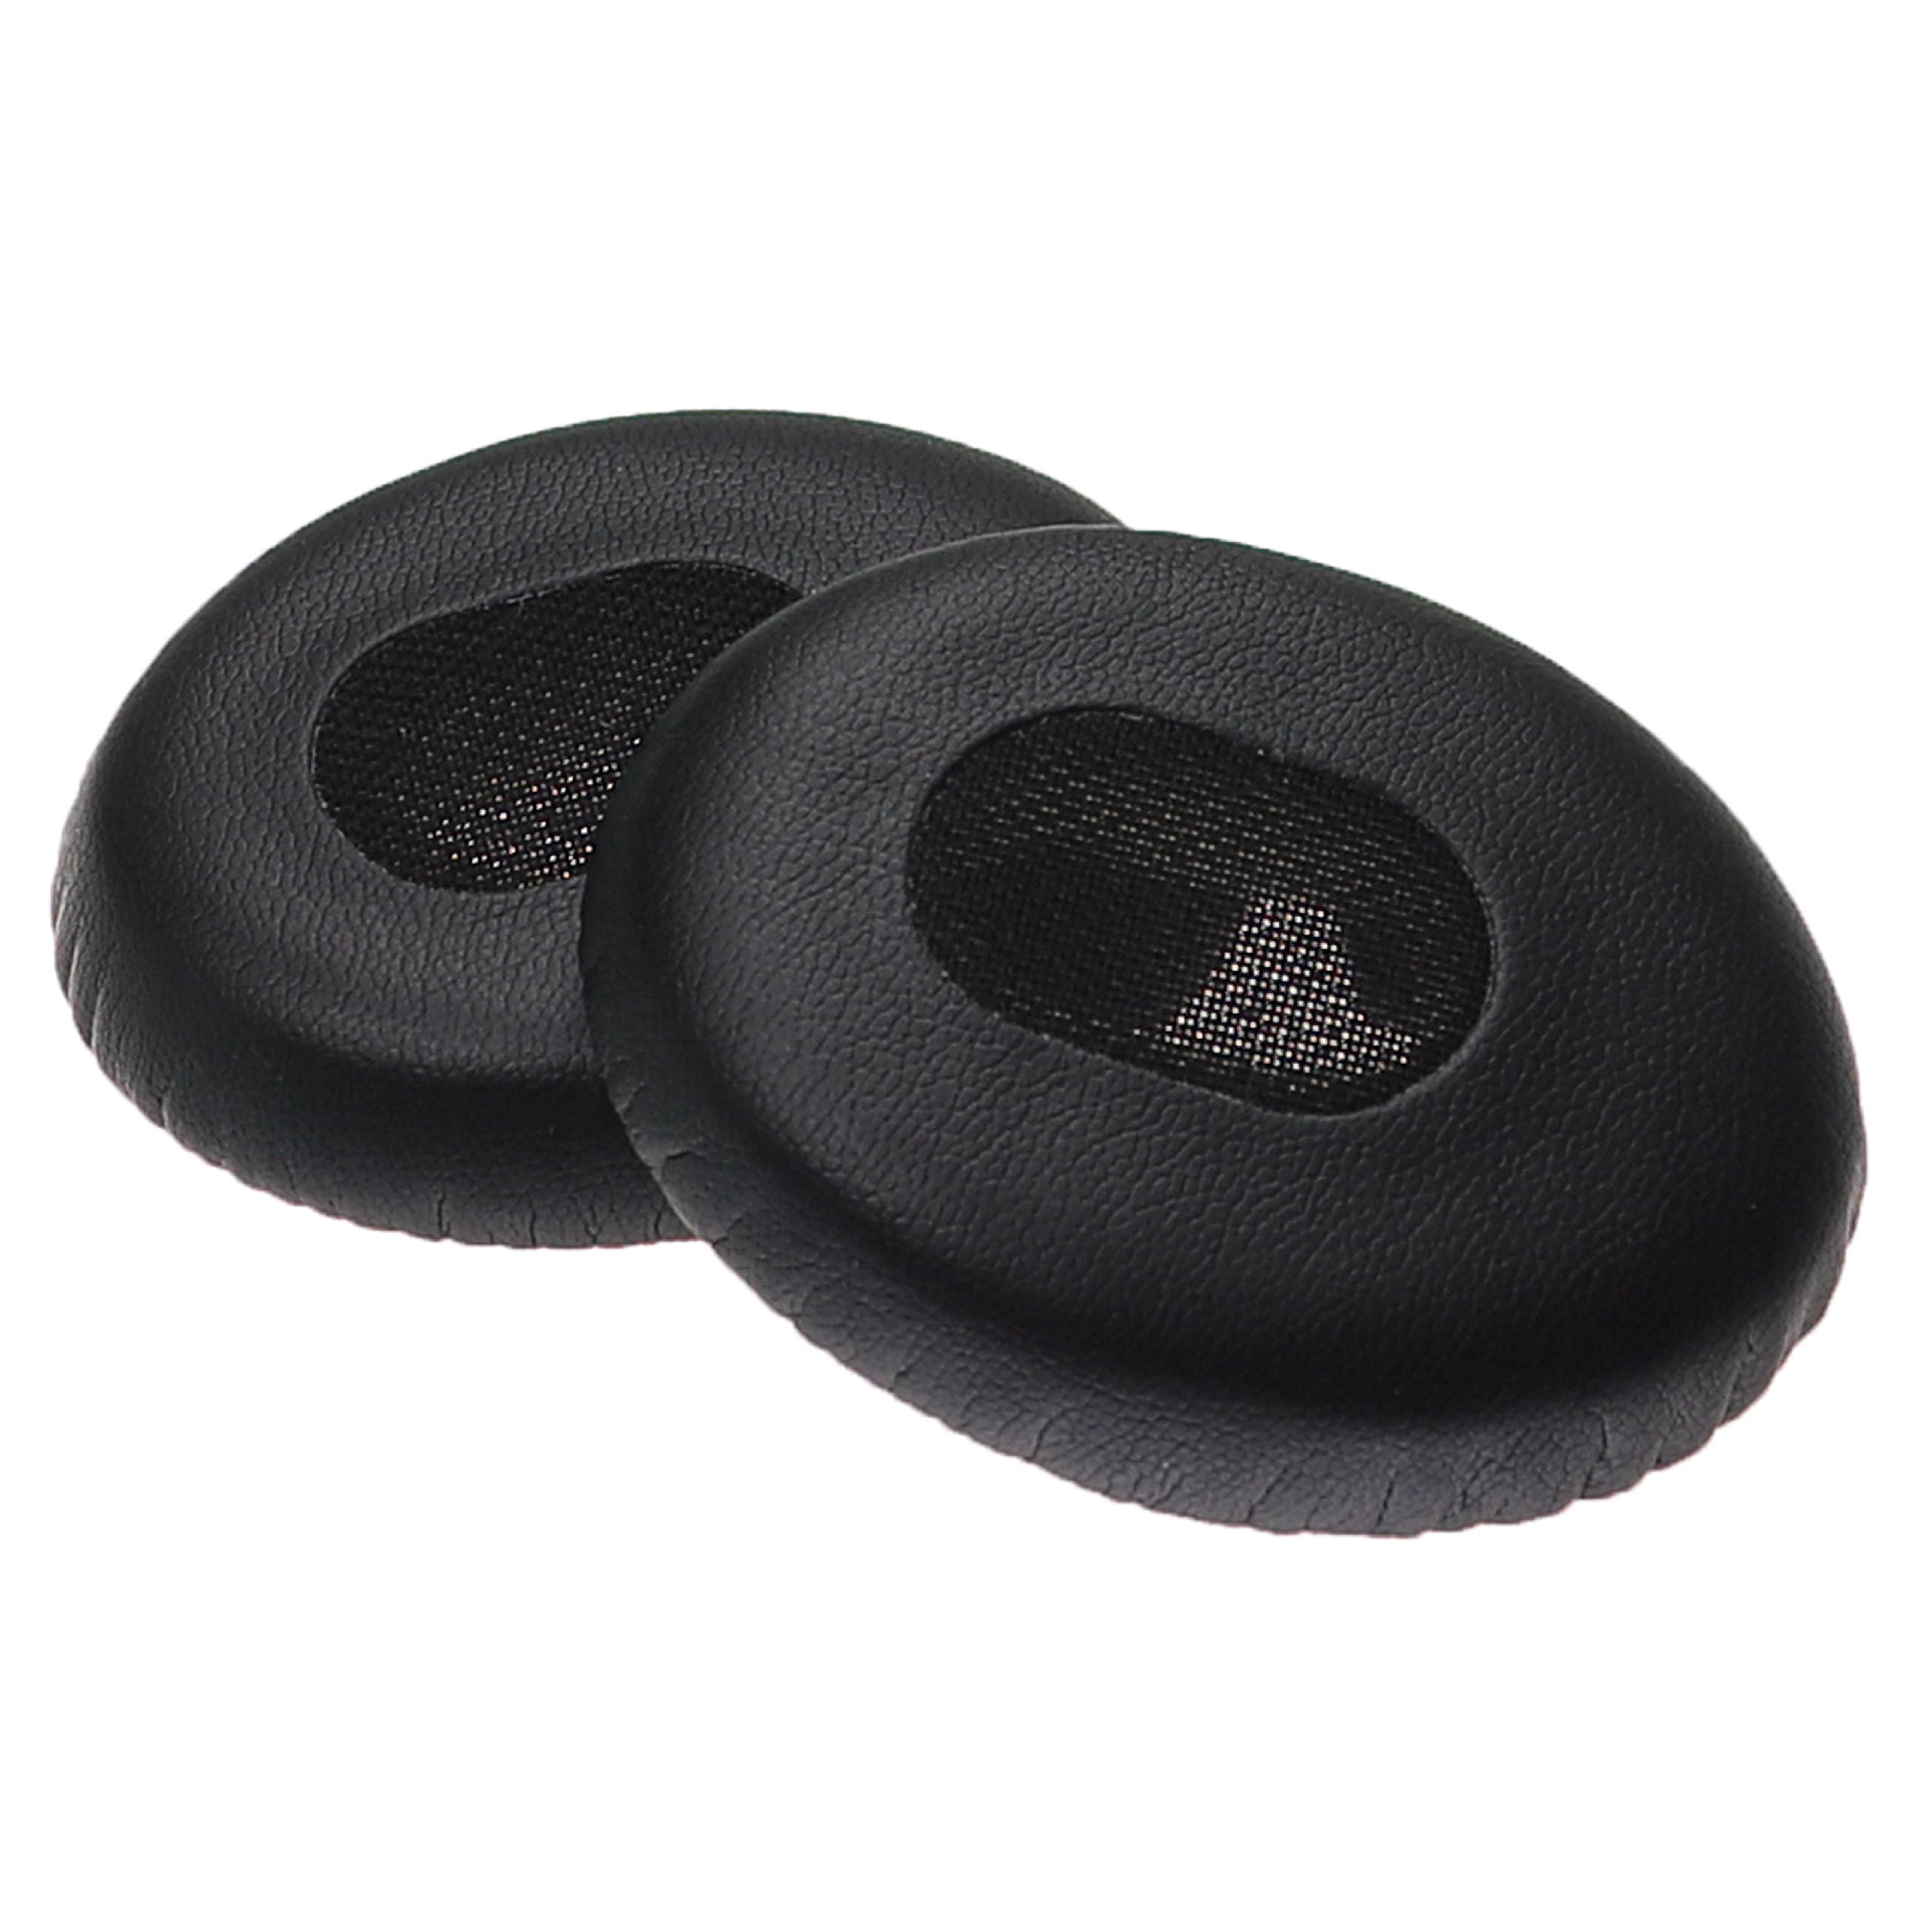 Ear Pads suitable for Bose QuietComfort Headphones etc. - with Memory Foam, Soft Material, 31 mm thick